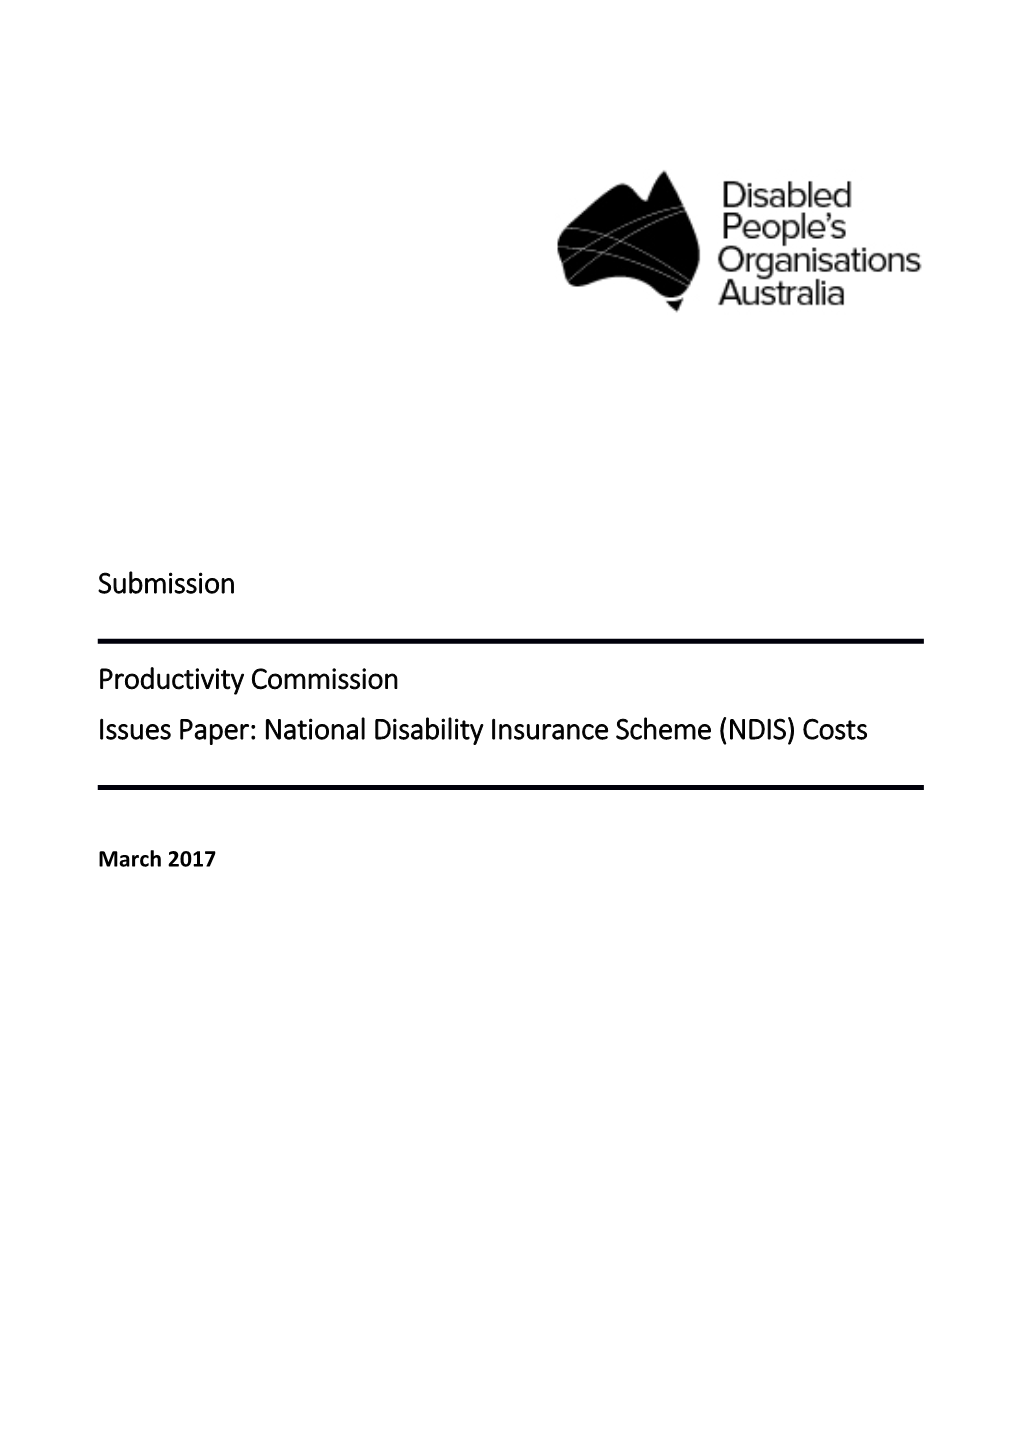 Submission 165 - Disabled People's Organisations Australia (DPO Australia) - National Disability